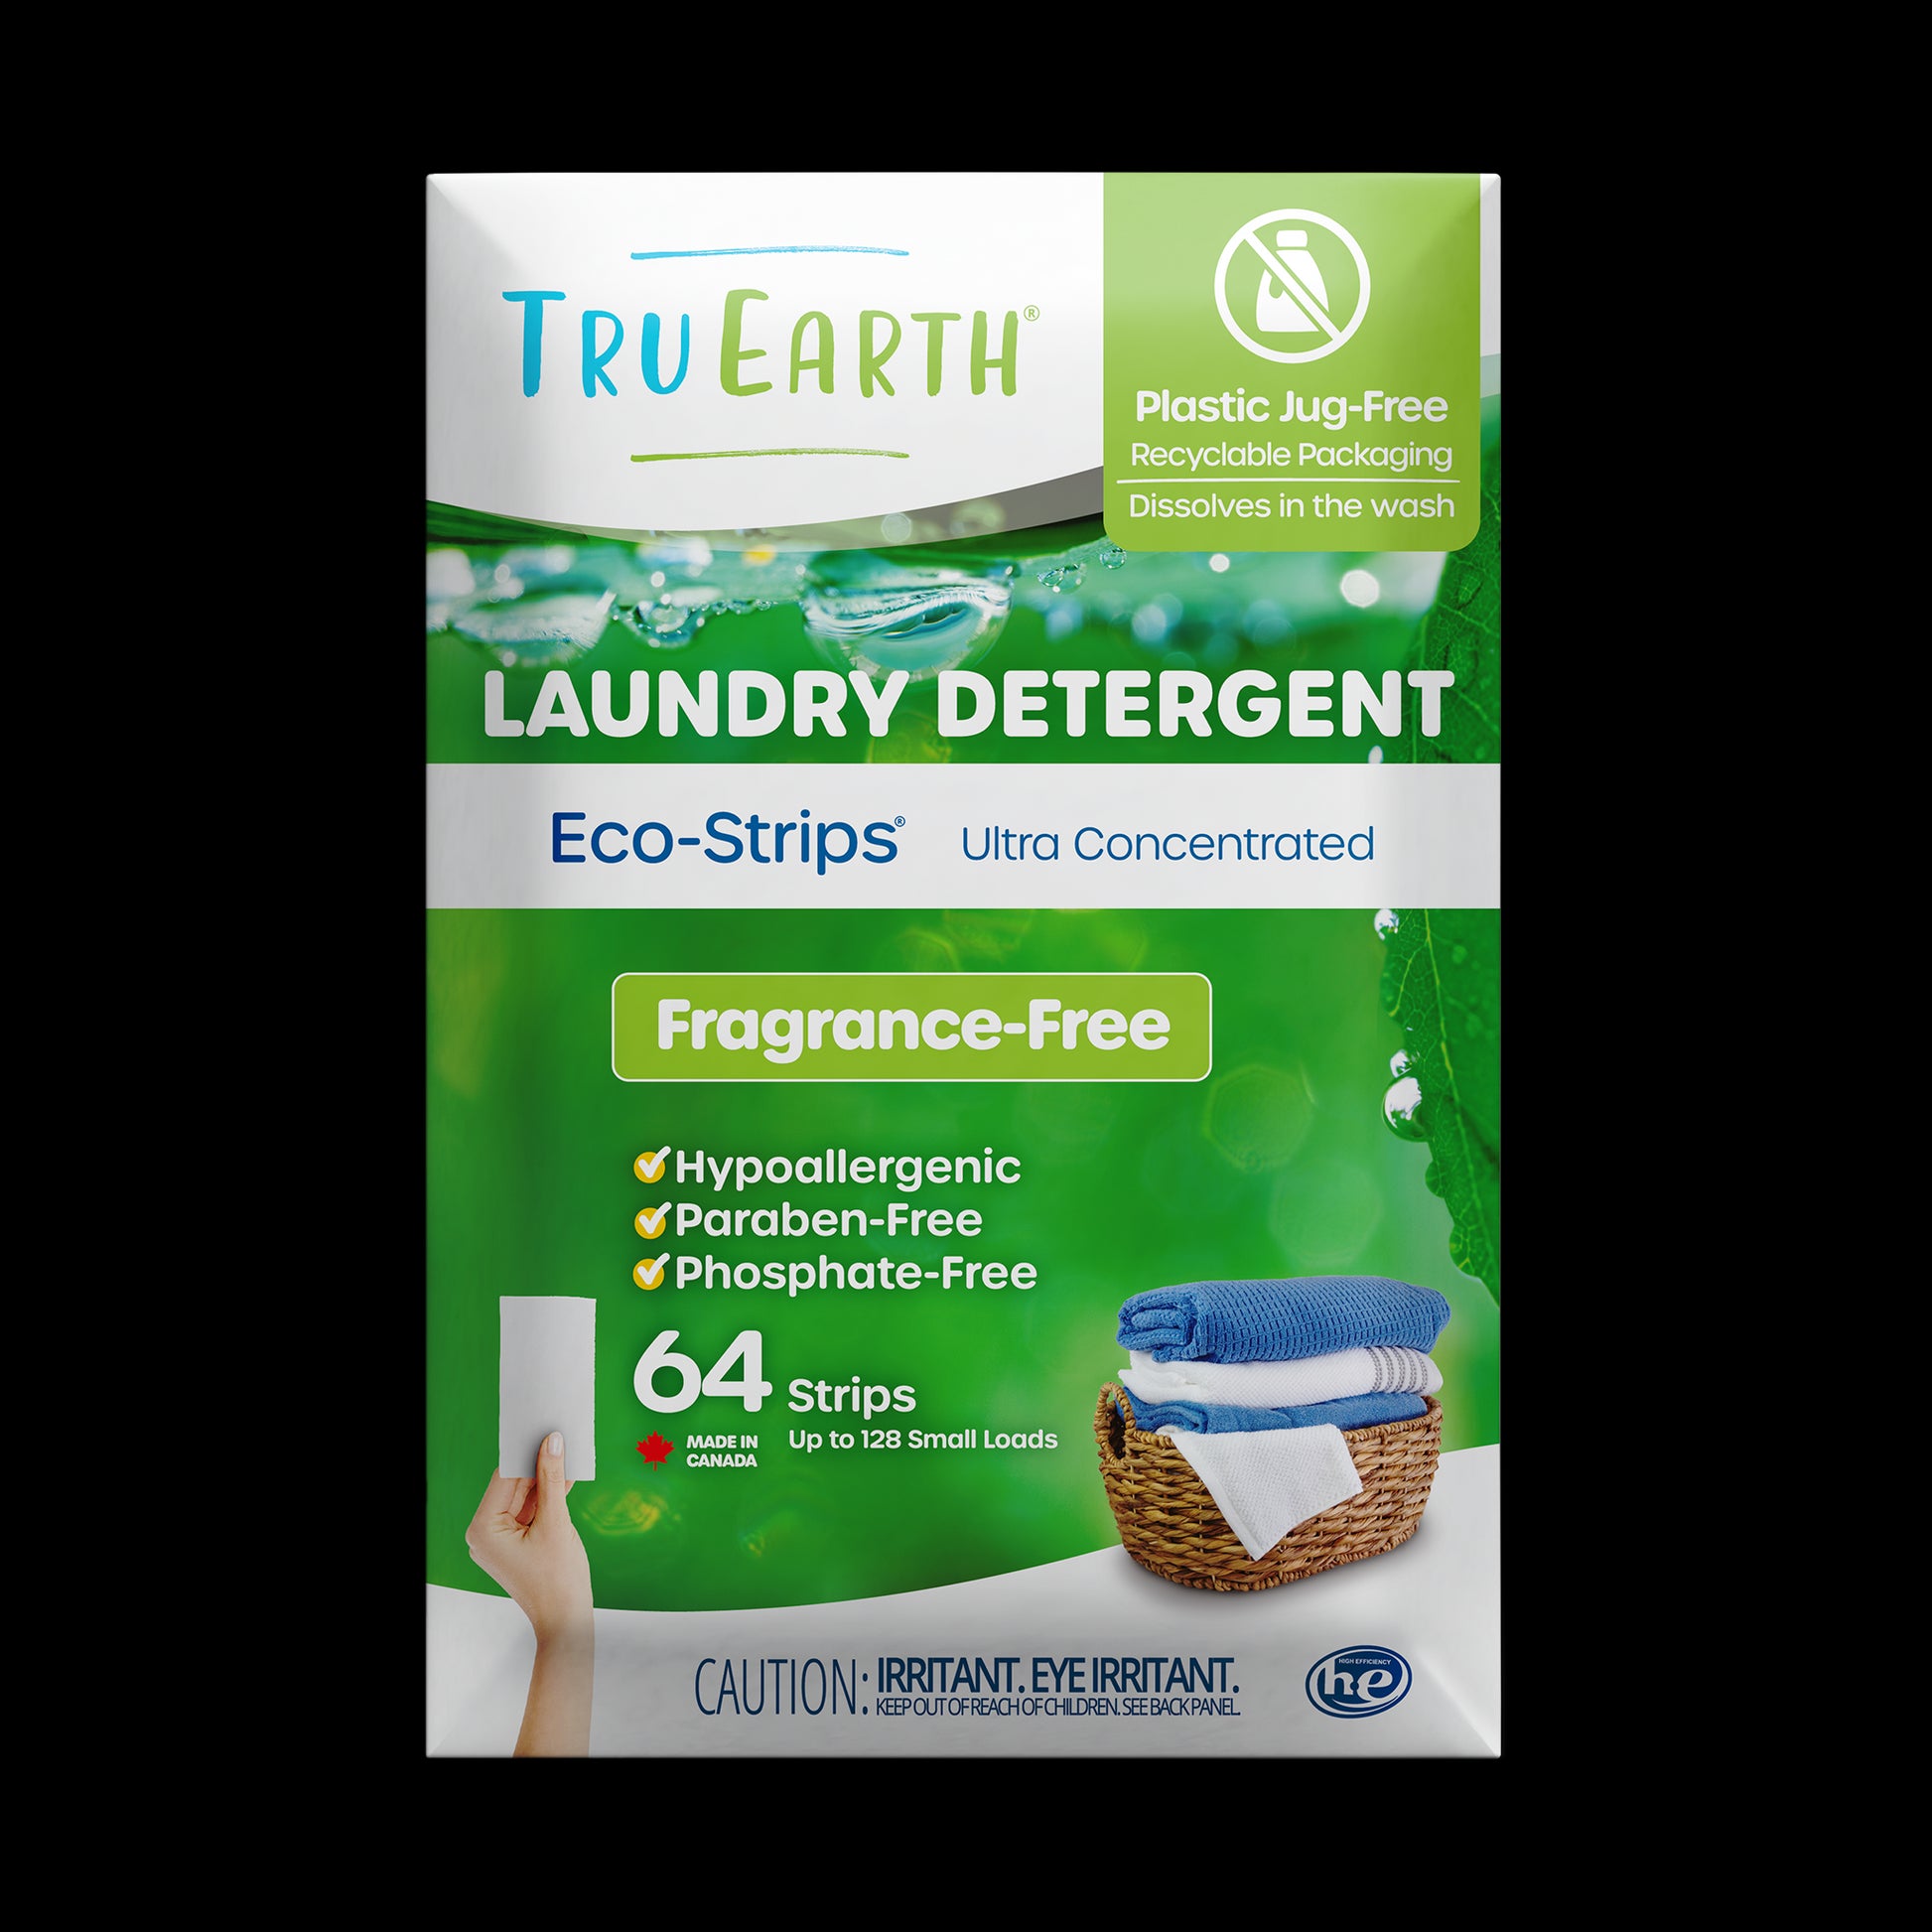 TruEarth Laundry Detergent Fragrance-Free Front of Package